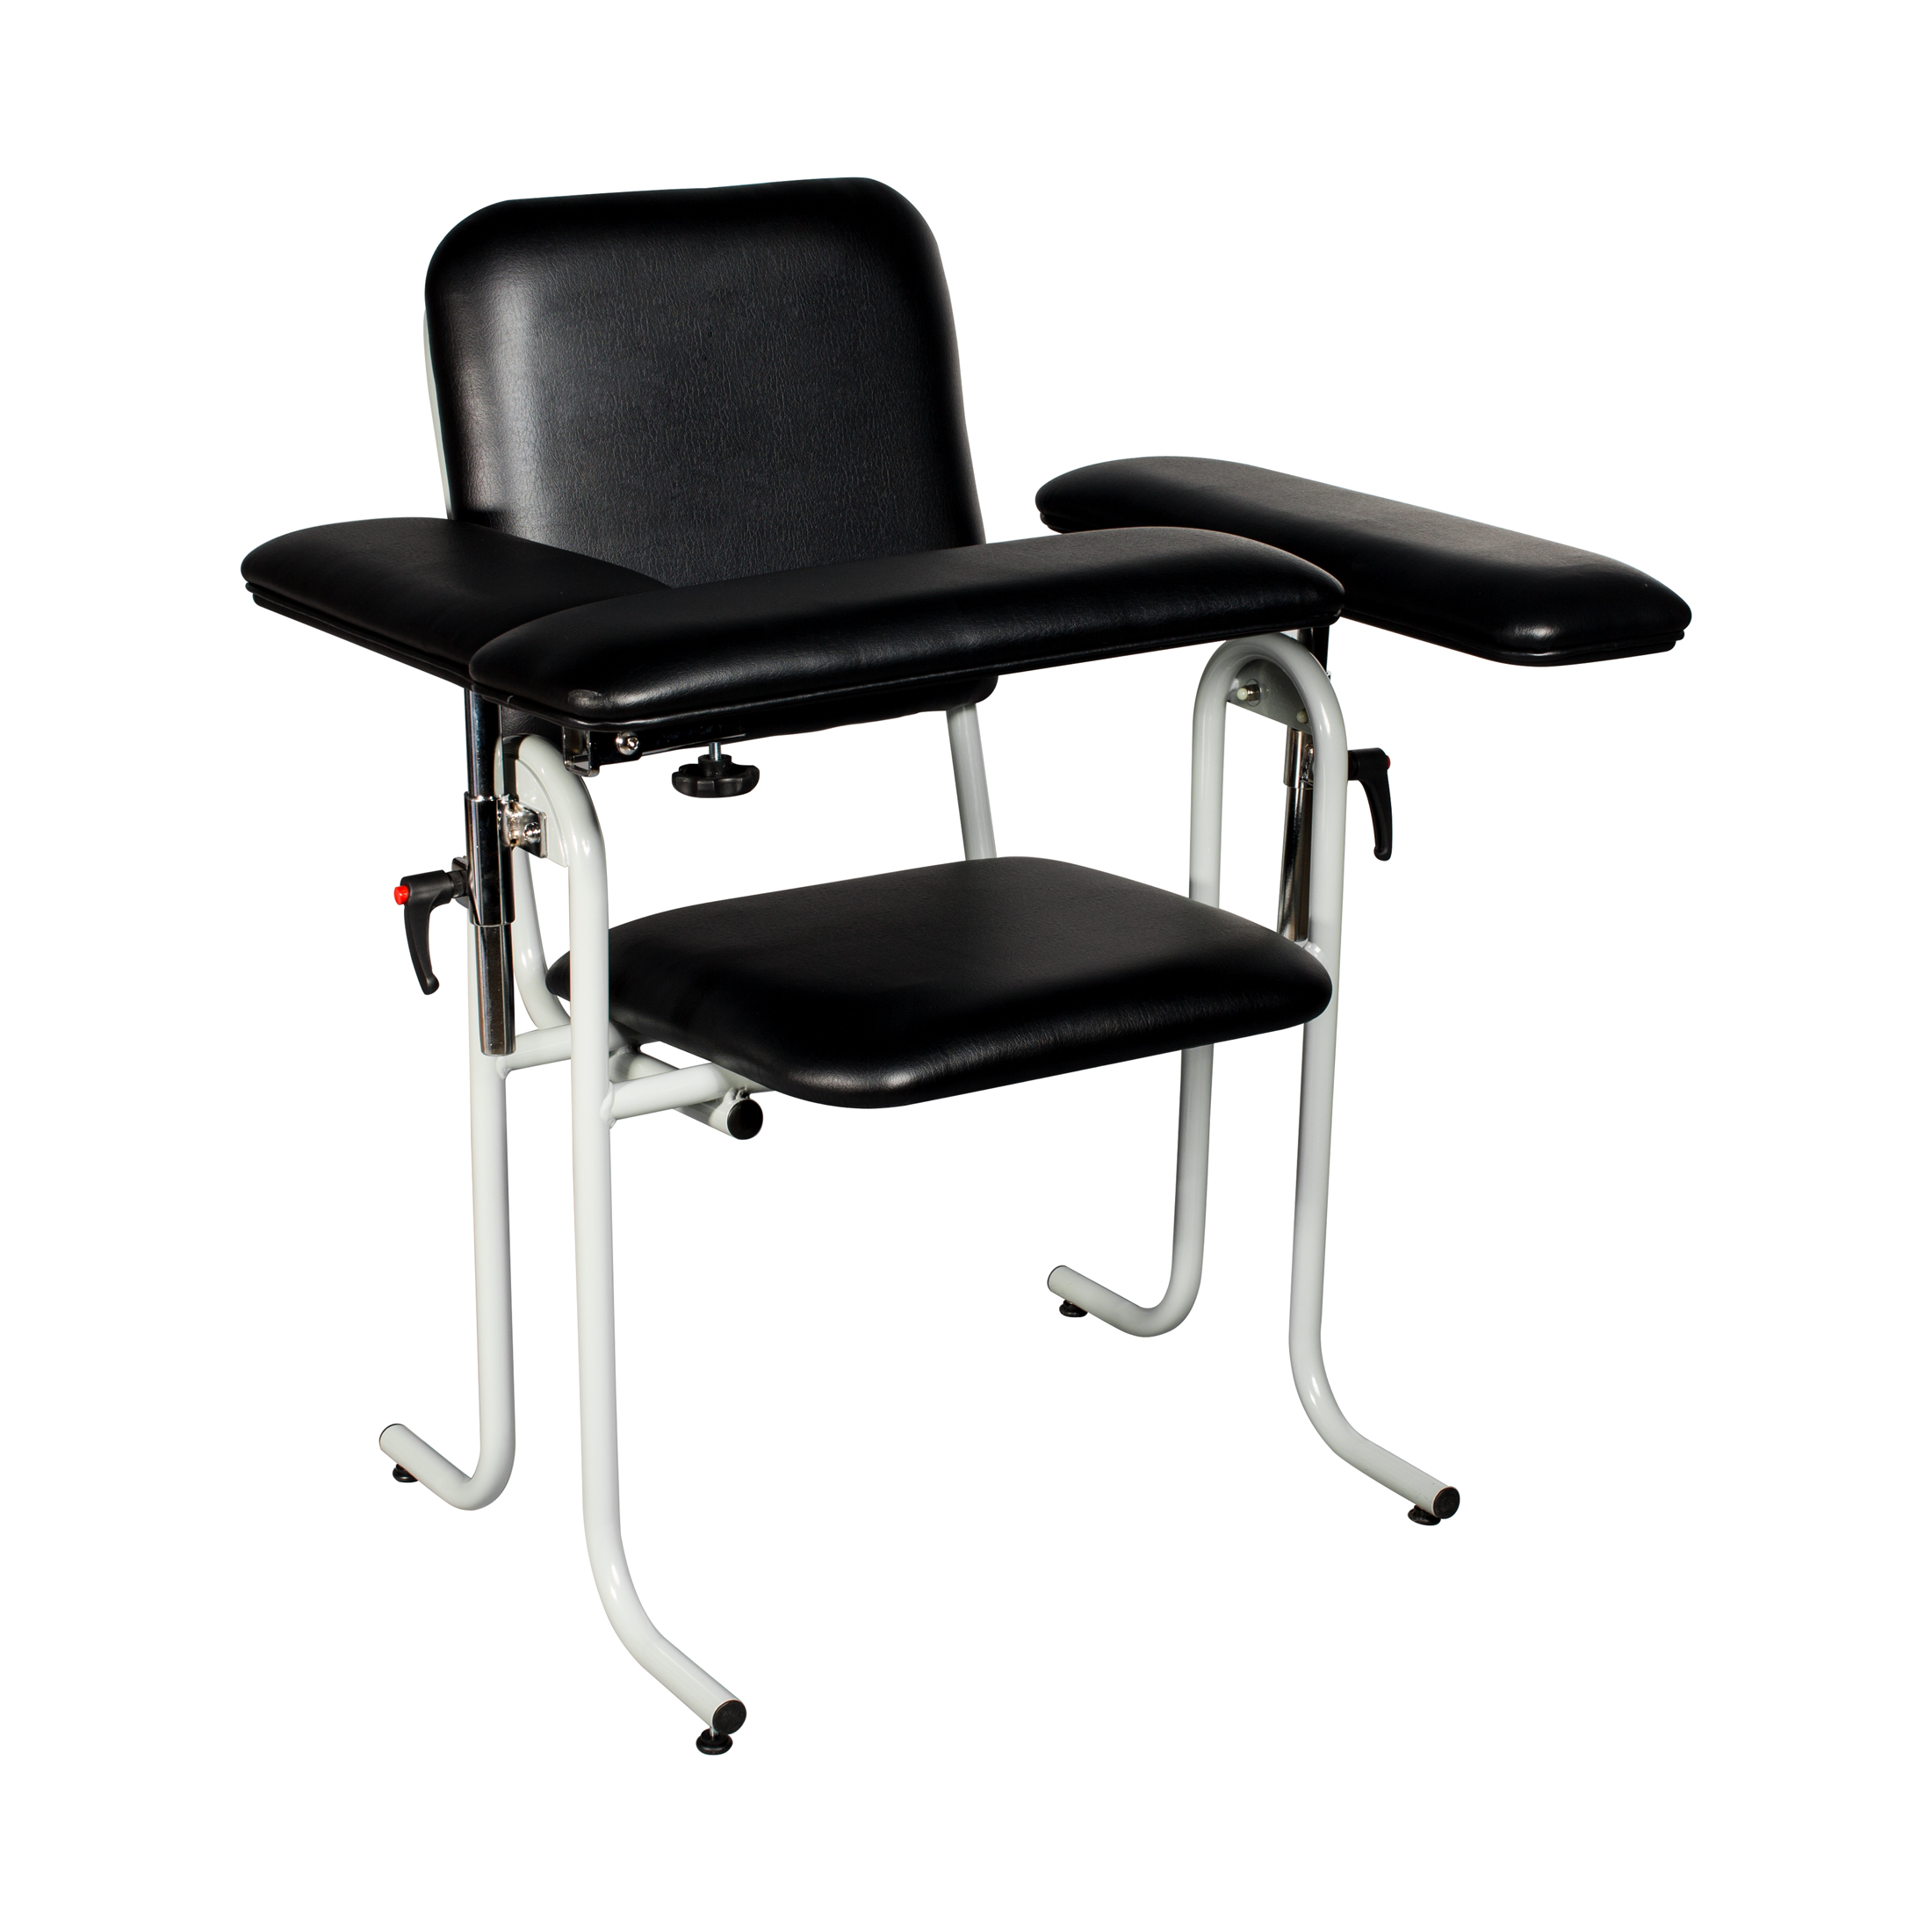 Phlebotomy Chairs Products, Supplies and Equipment